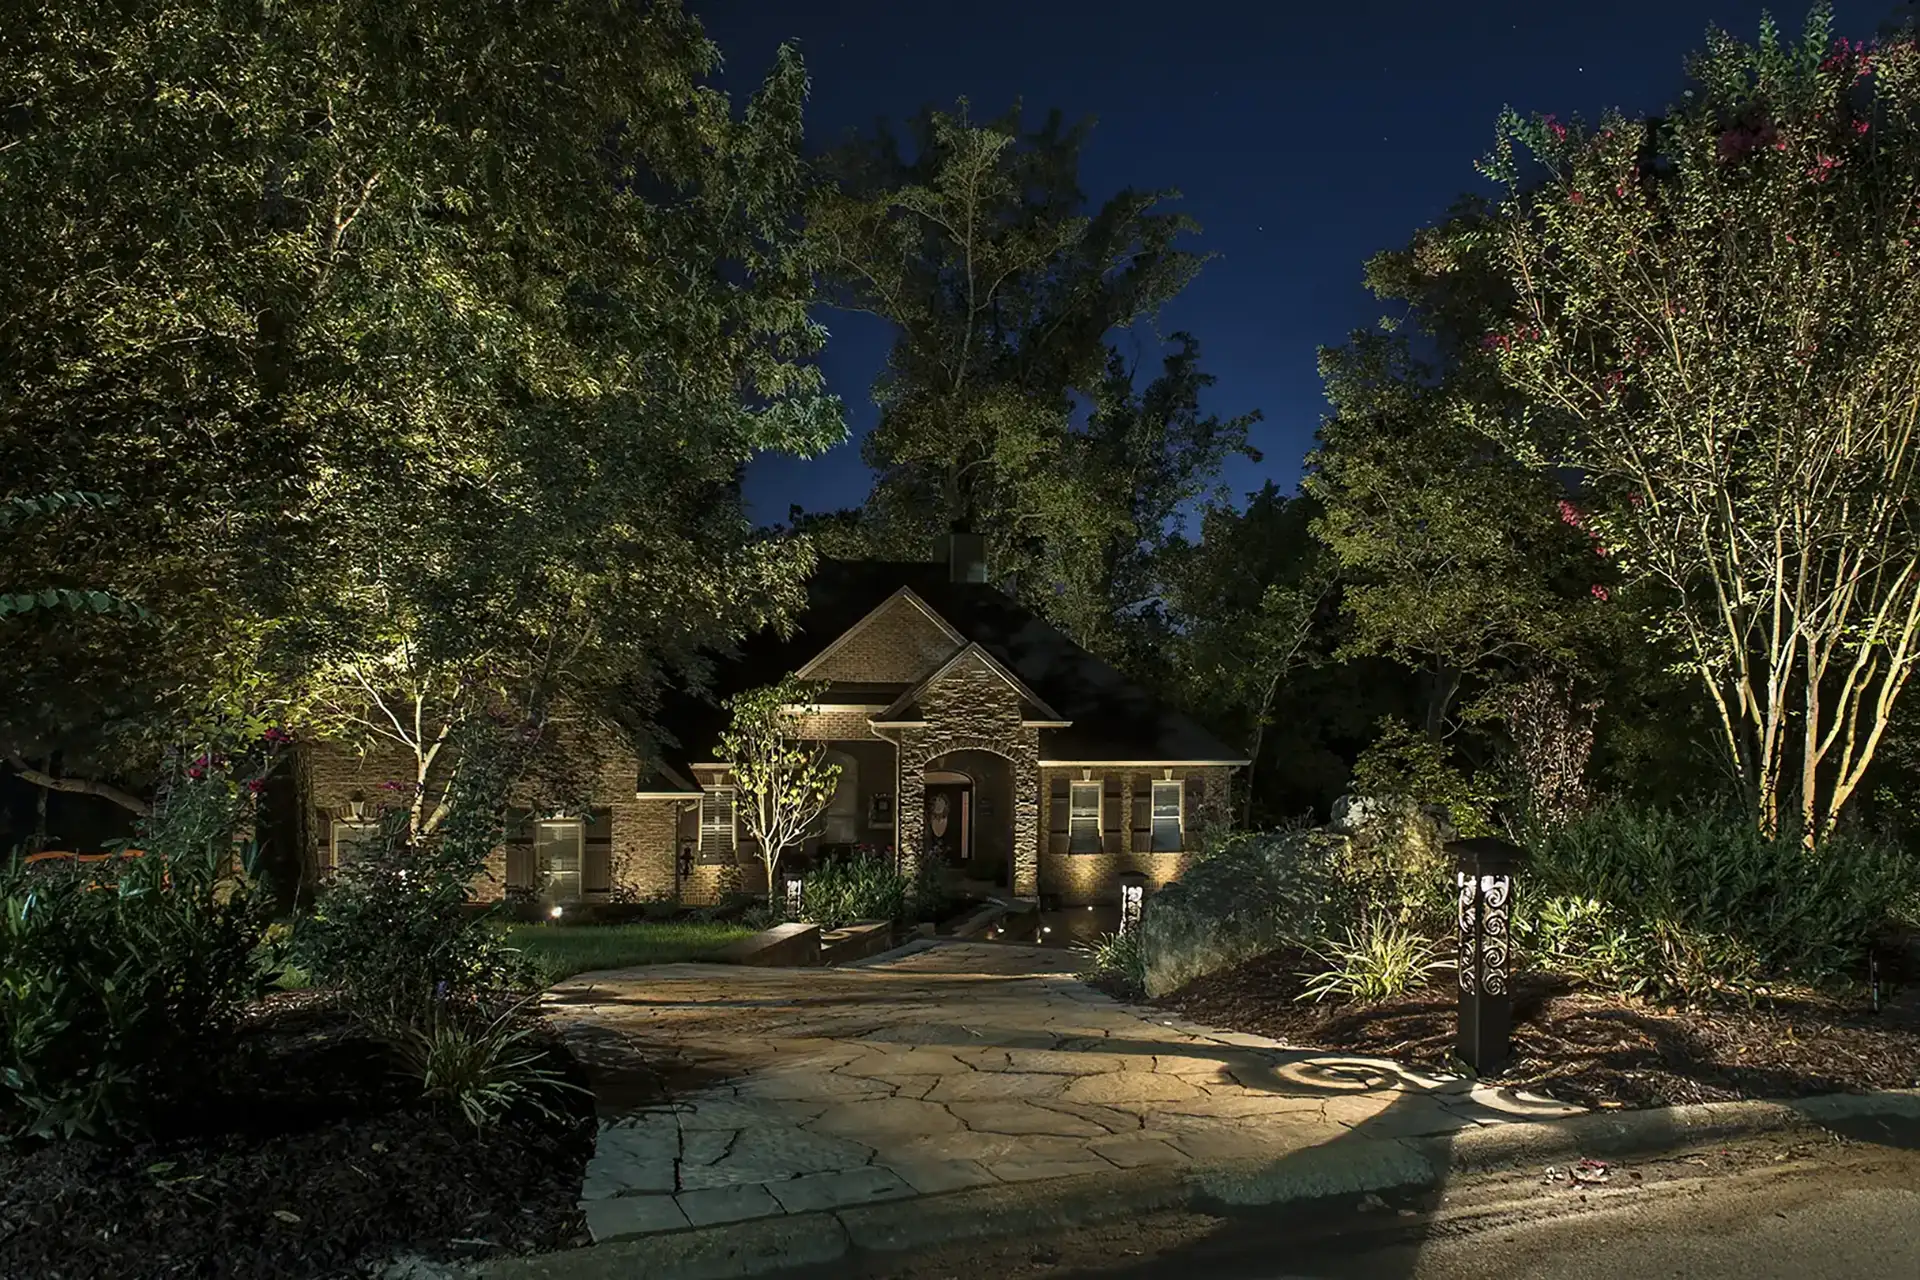 Farmer residence image 3 front view driveway Lighthouse Outdoor Lighting and Audio Knoxville TN